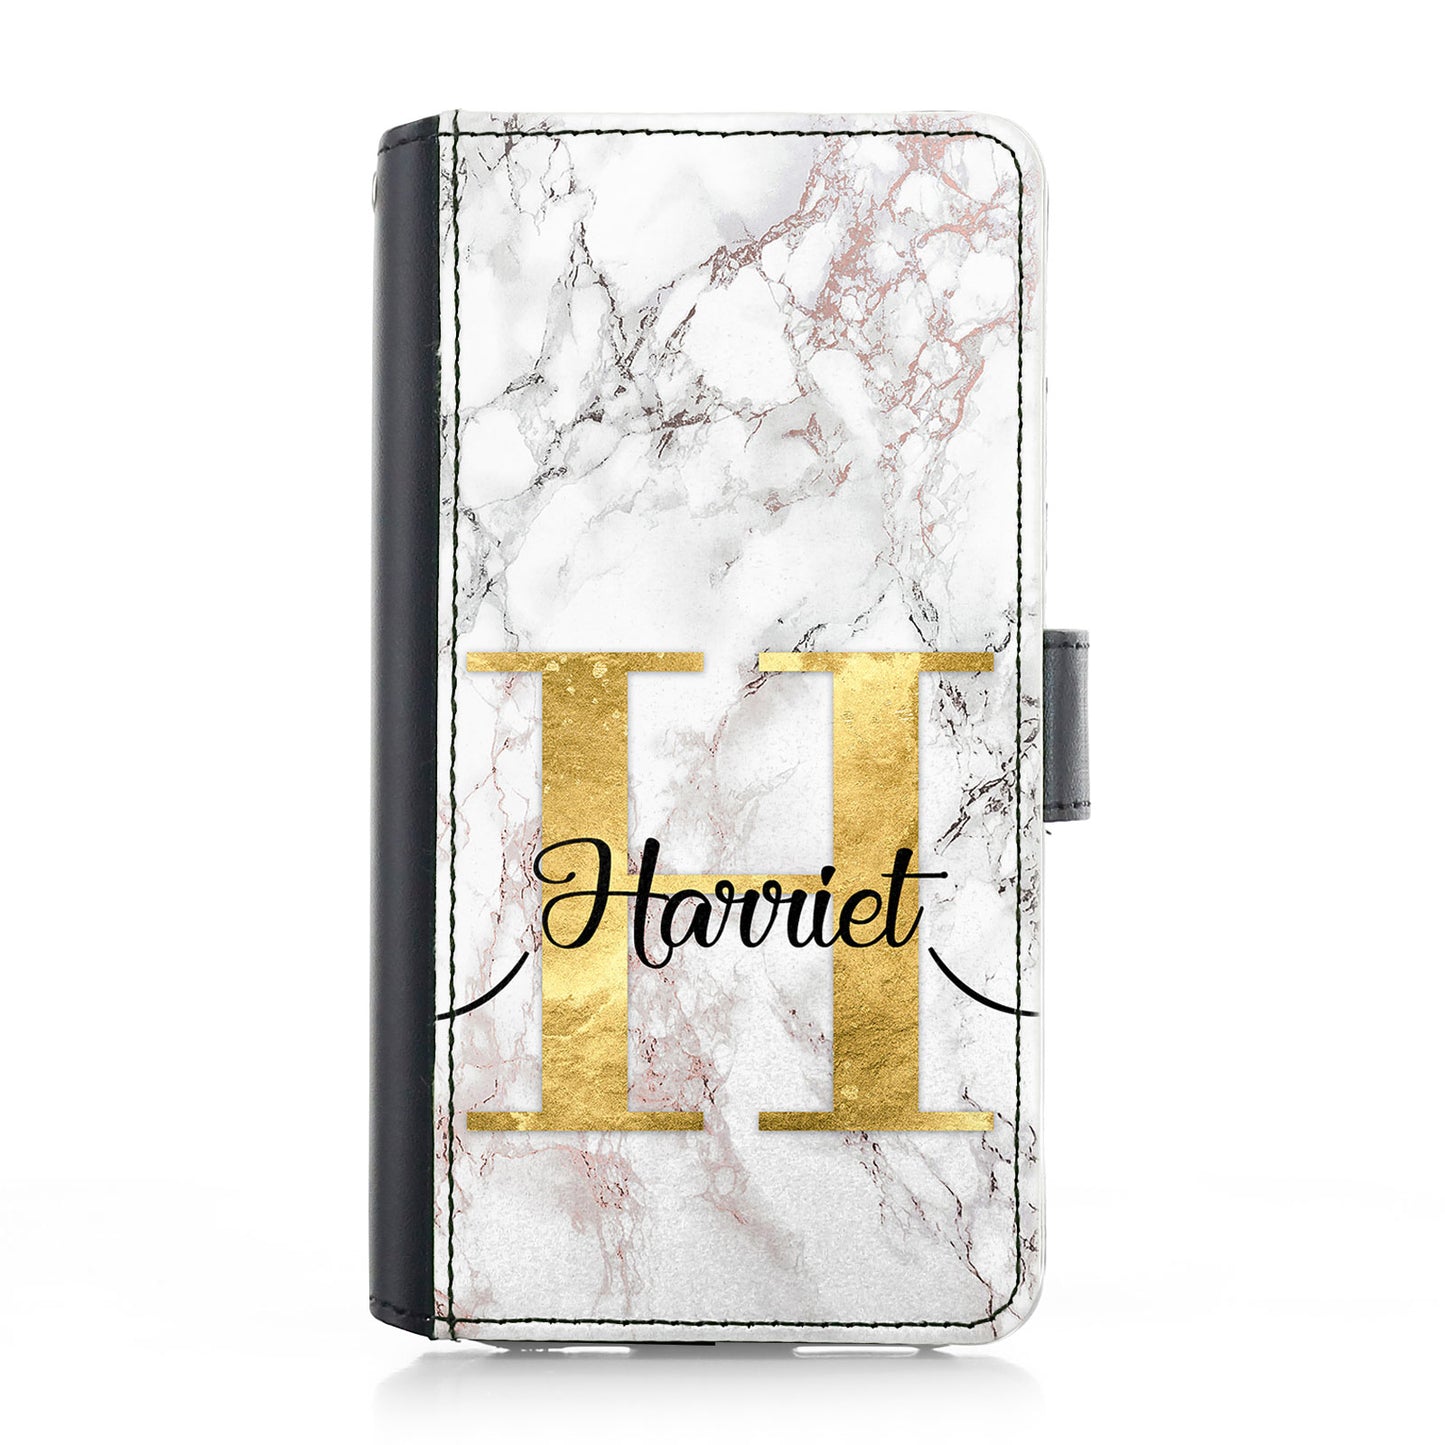 Personalised iPhone Leather Case - White Speckle Marble and Gold Initial/Name